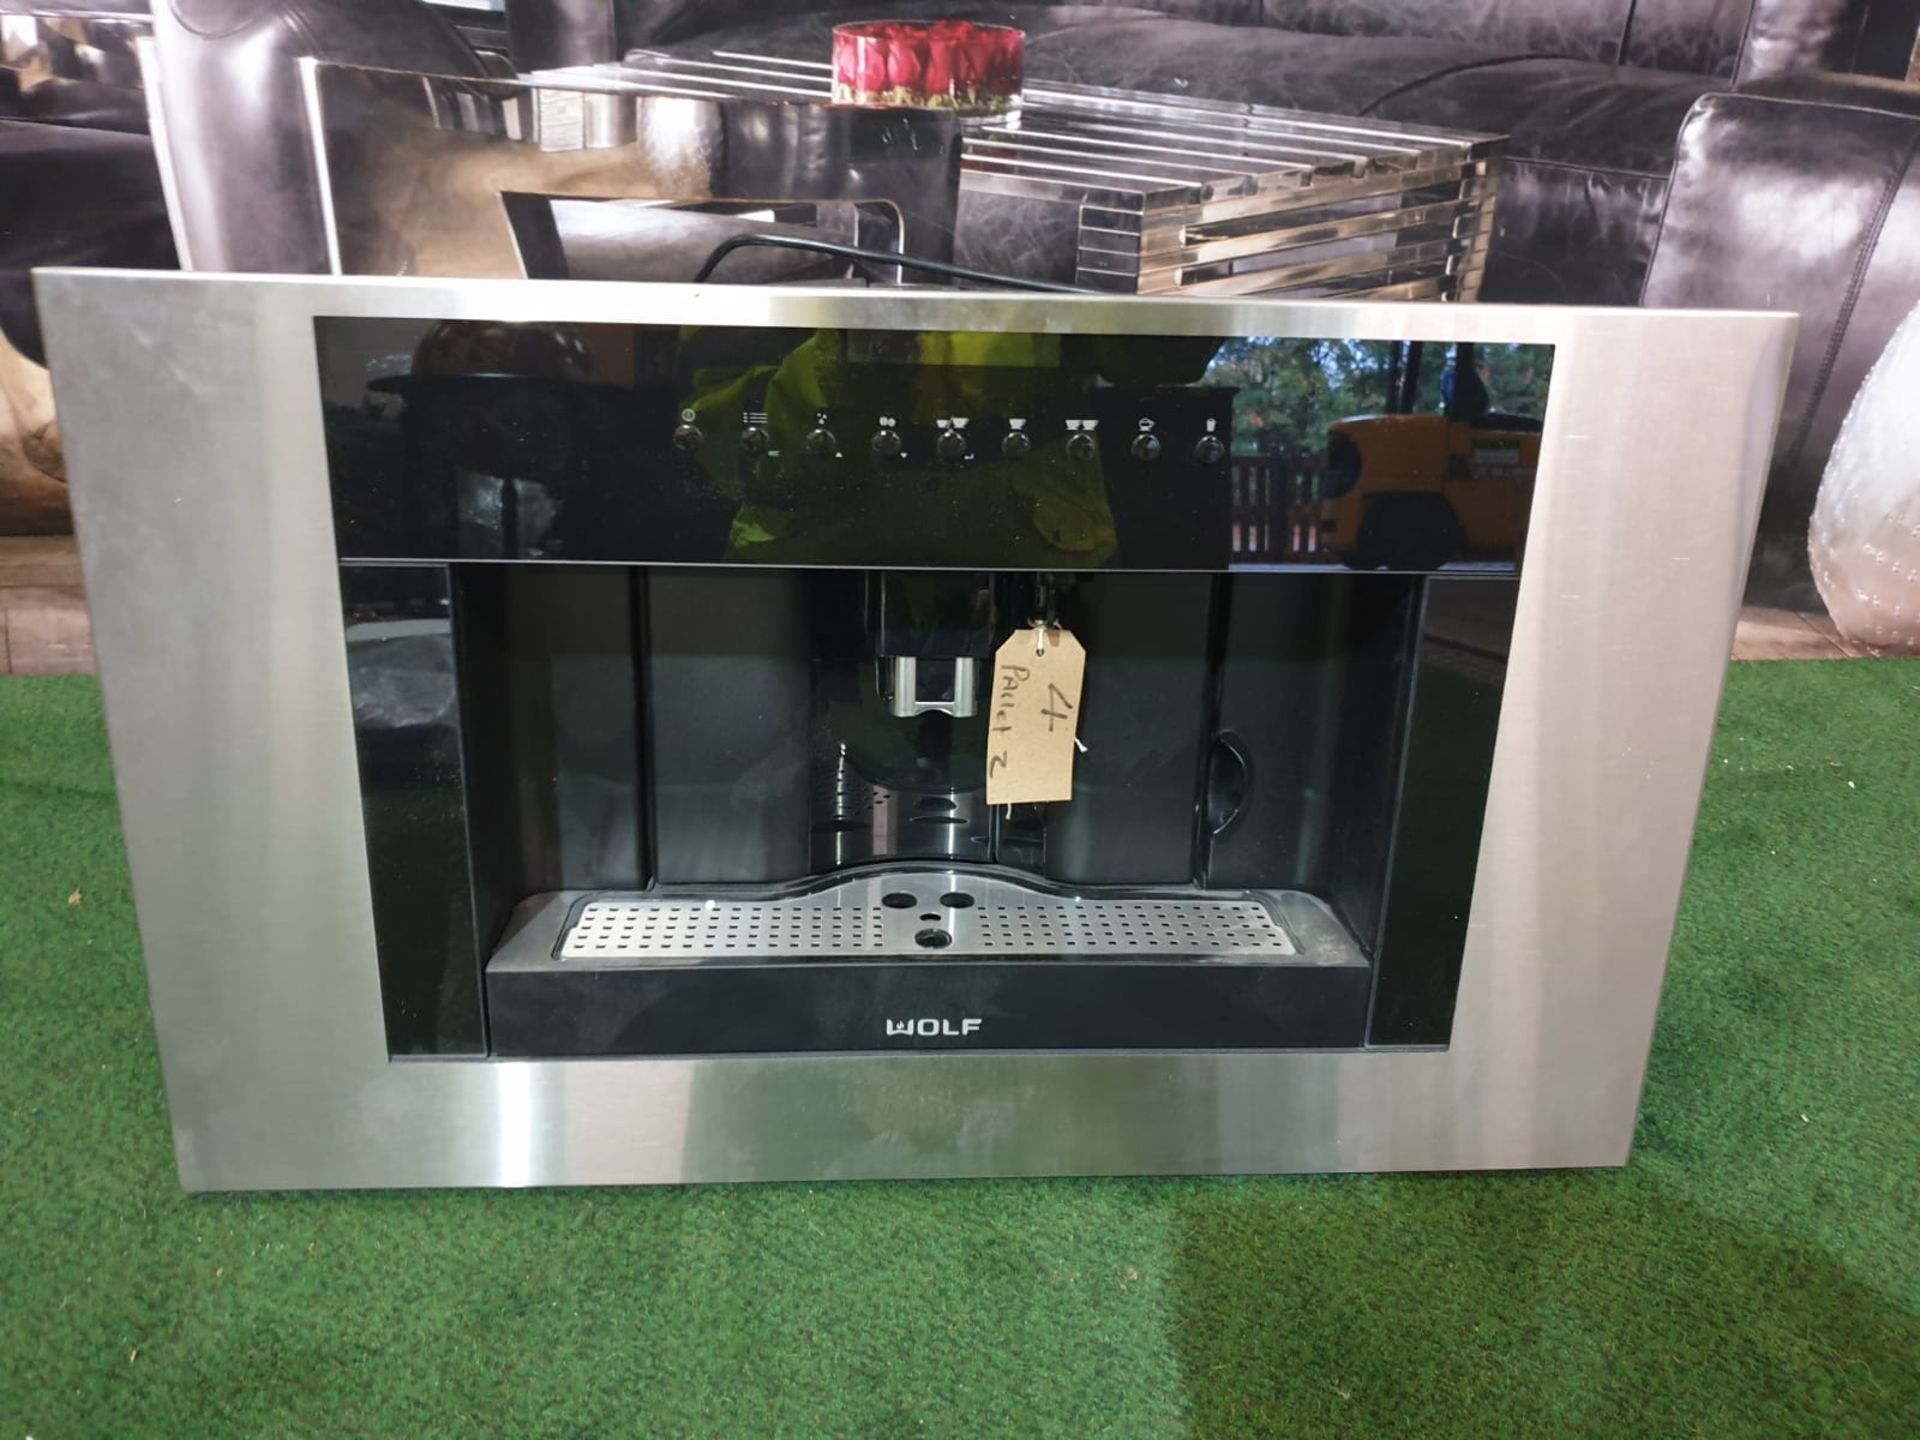 Wolf ICBEC30TM-B Built In Coffee Machine - Stainless Steel The M Series Transitional Coffee System - Image 3 of 3